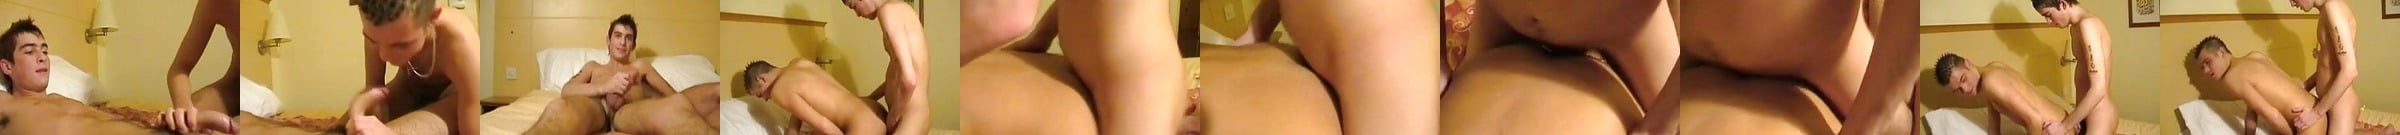 Featured College Dorm Mates Suck Each Other And Cum Gay Porn Videos